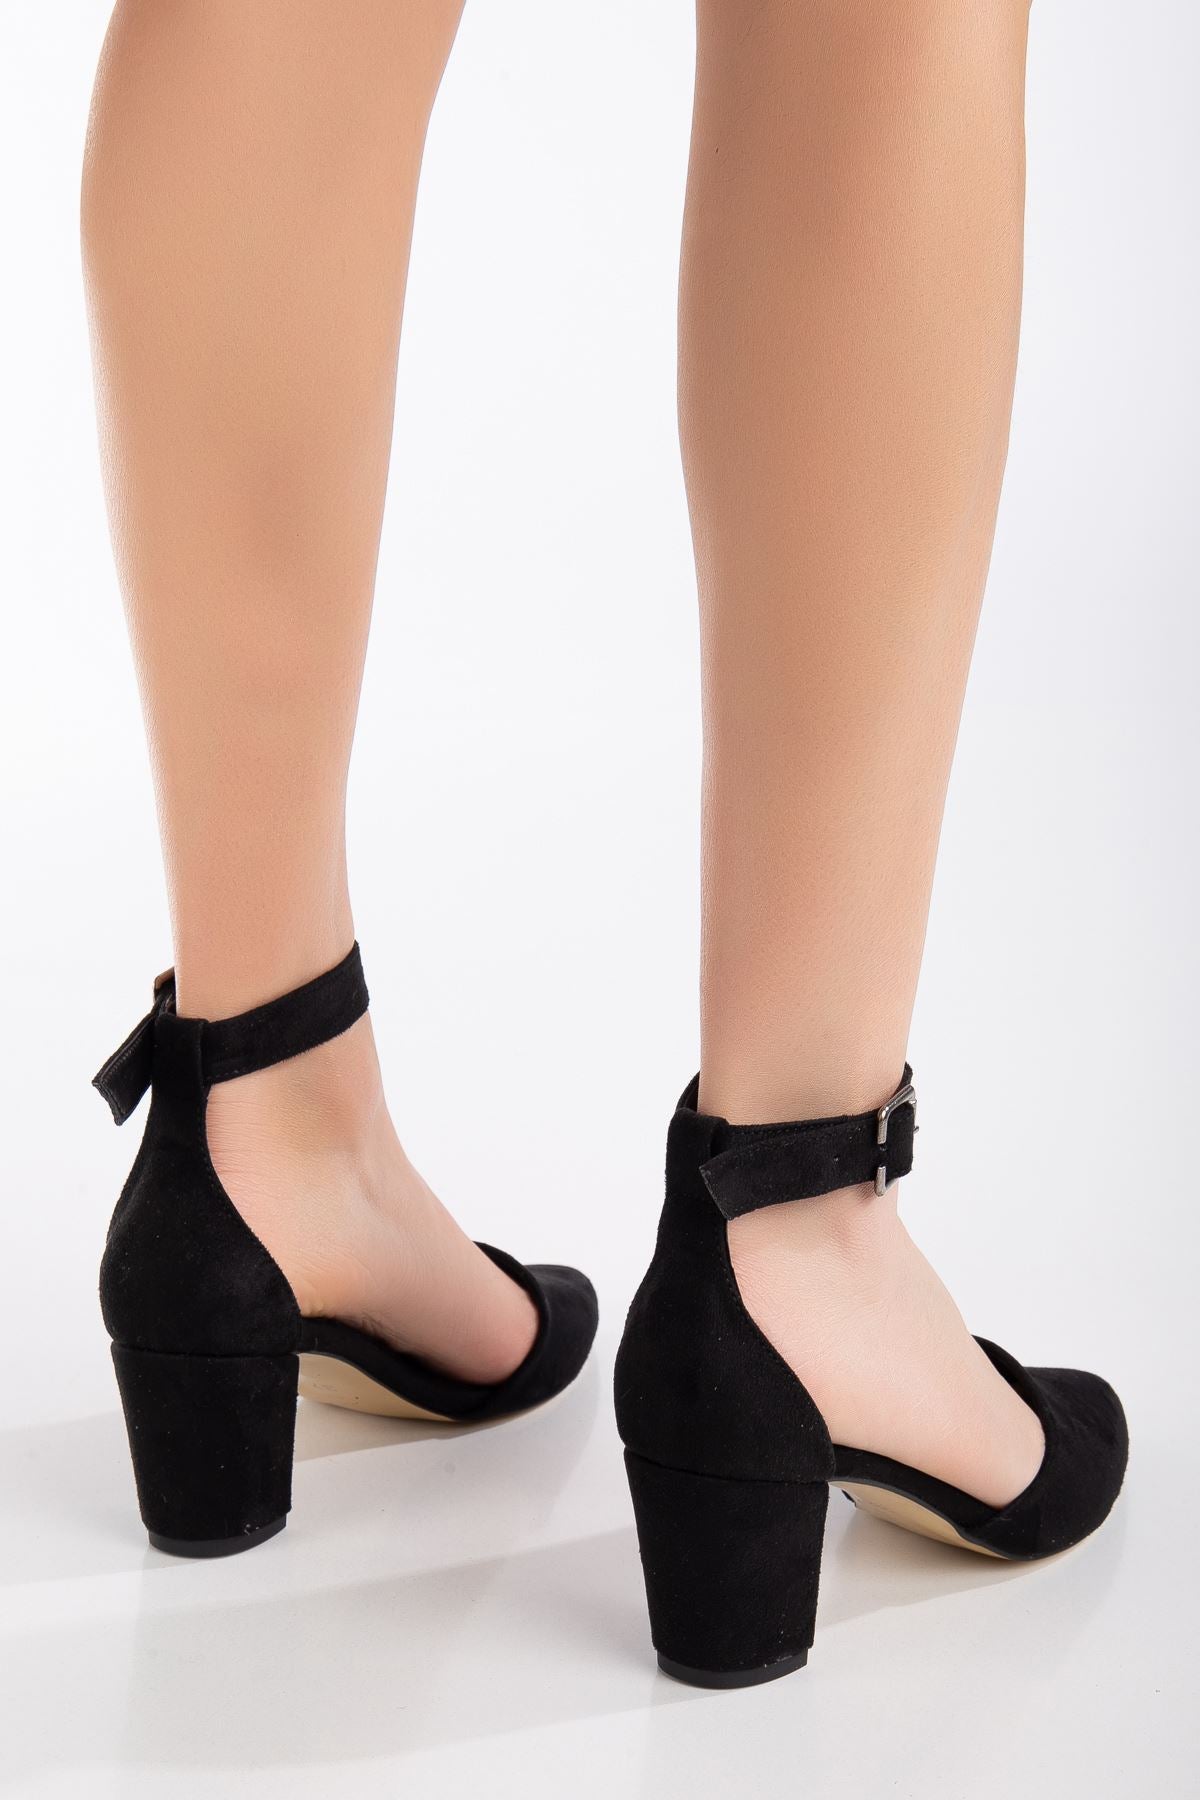 Lottis Black Suede Detailed Heeled Women's Shoes - STREETMODE™